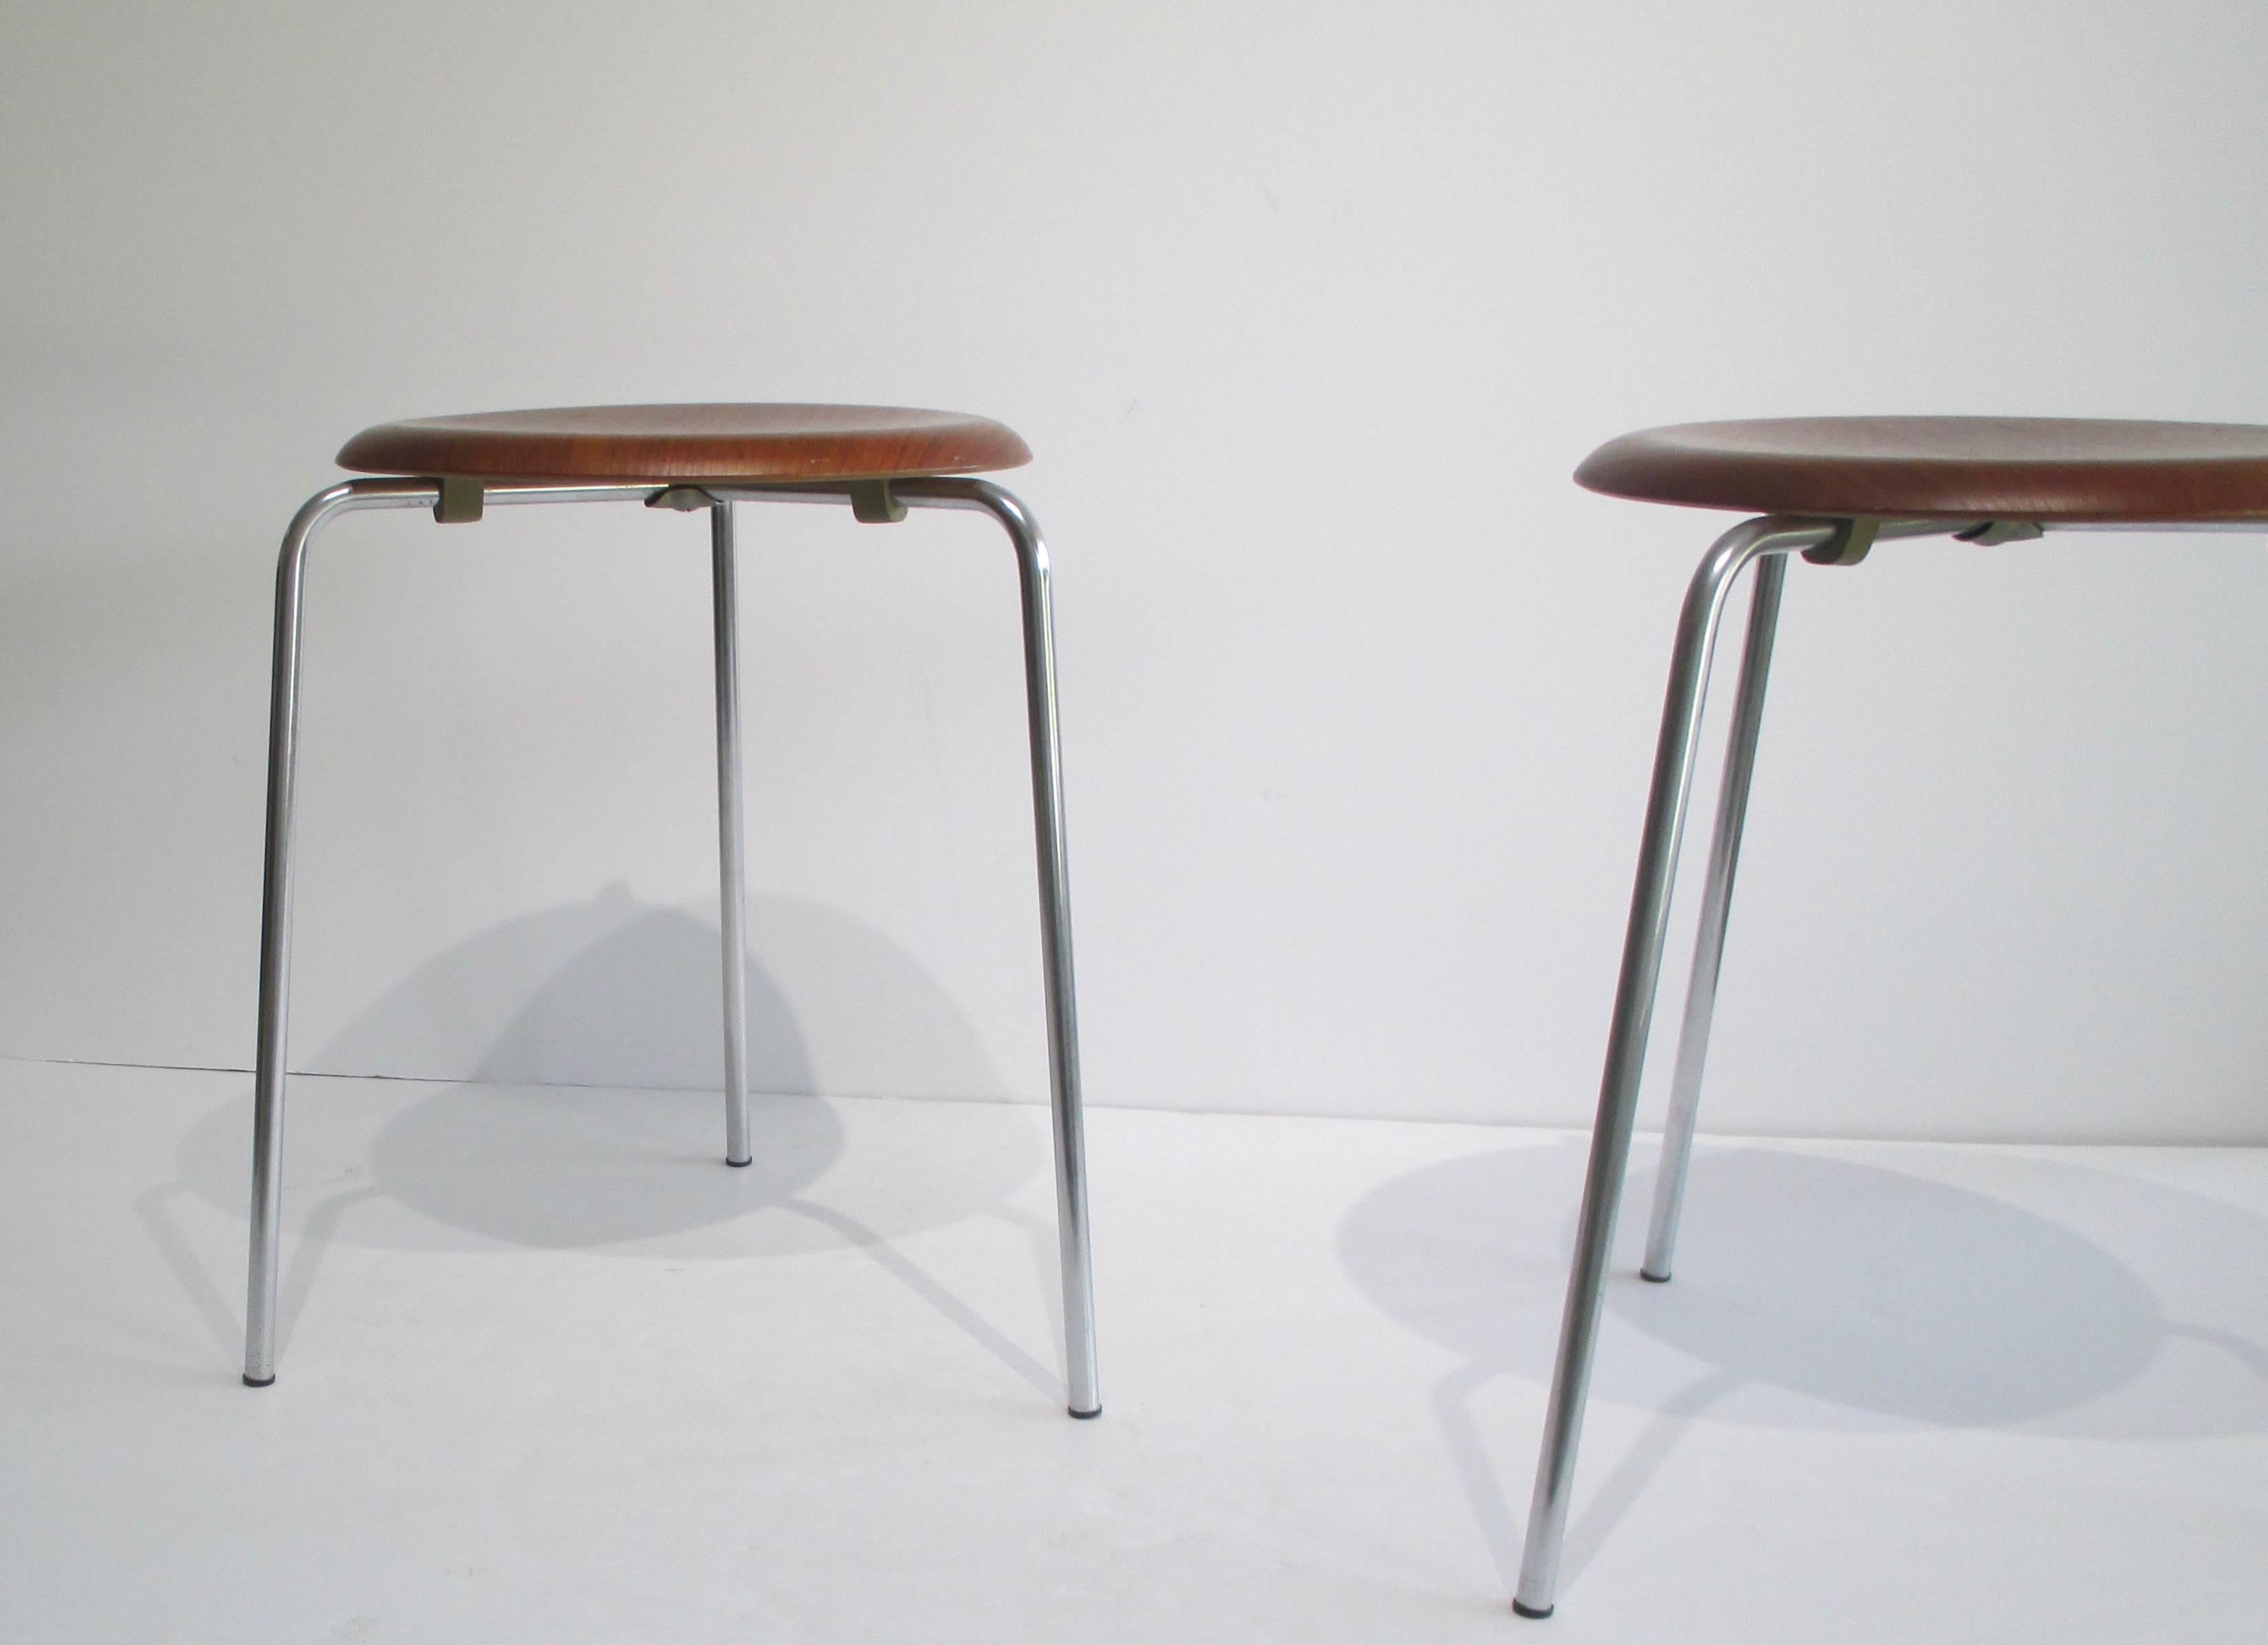 A pair of early Dot stools 1957 by Arne Jacobson.
 